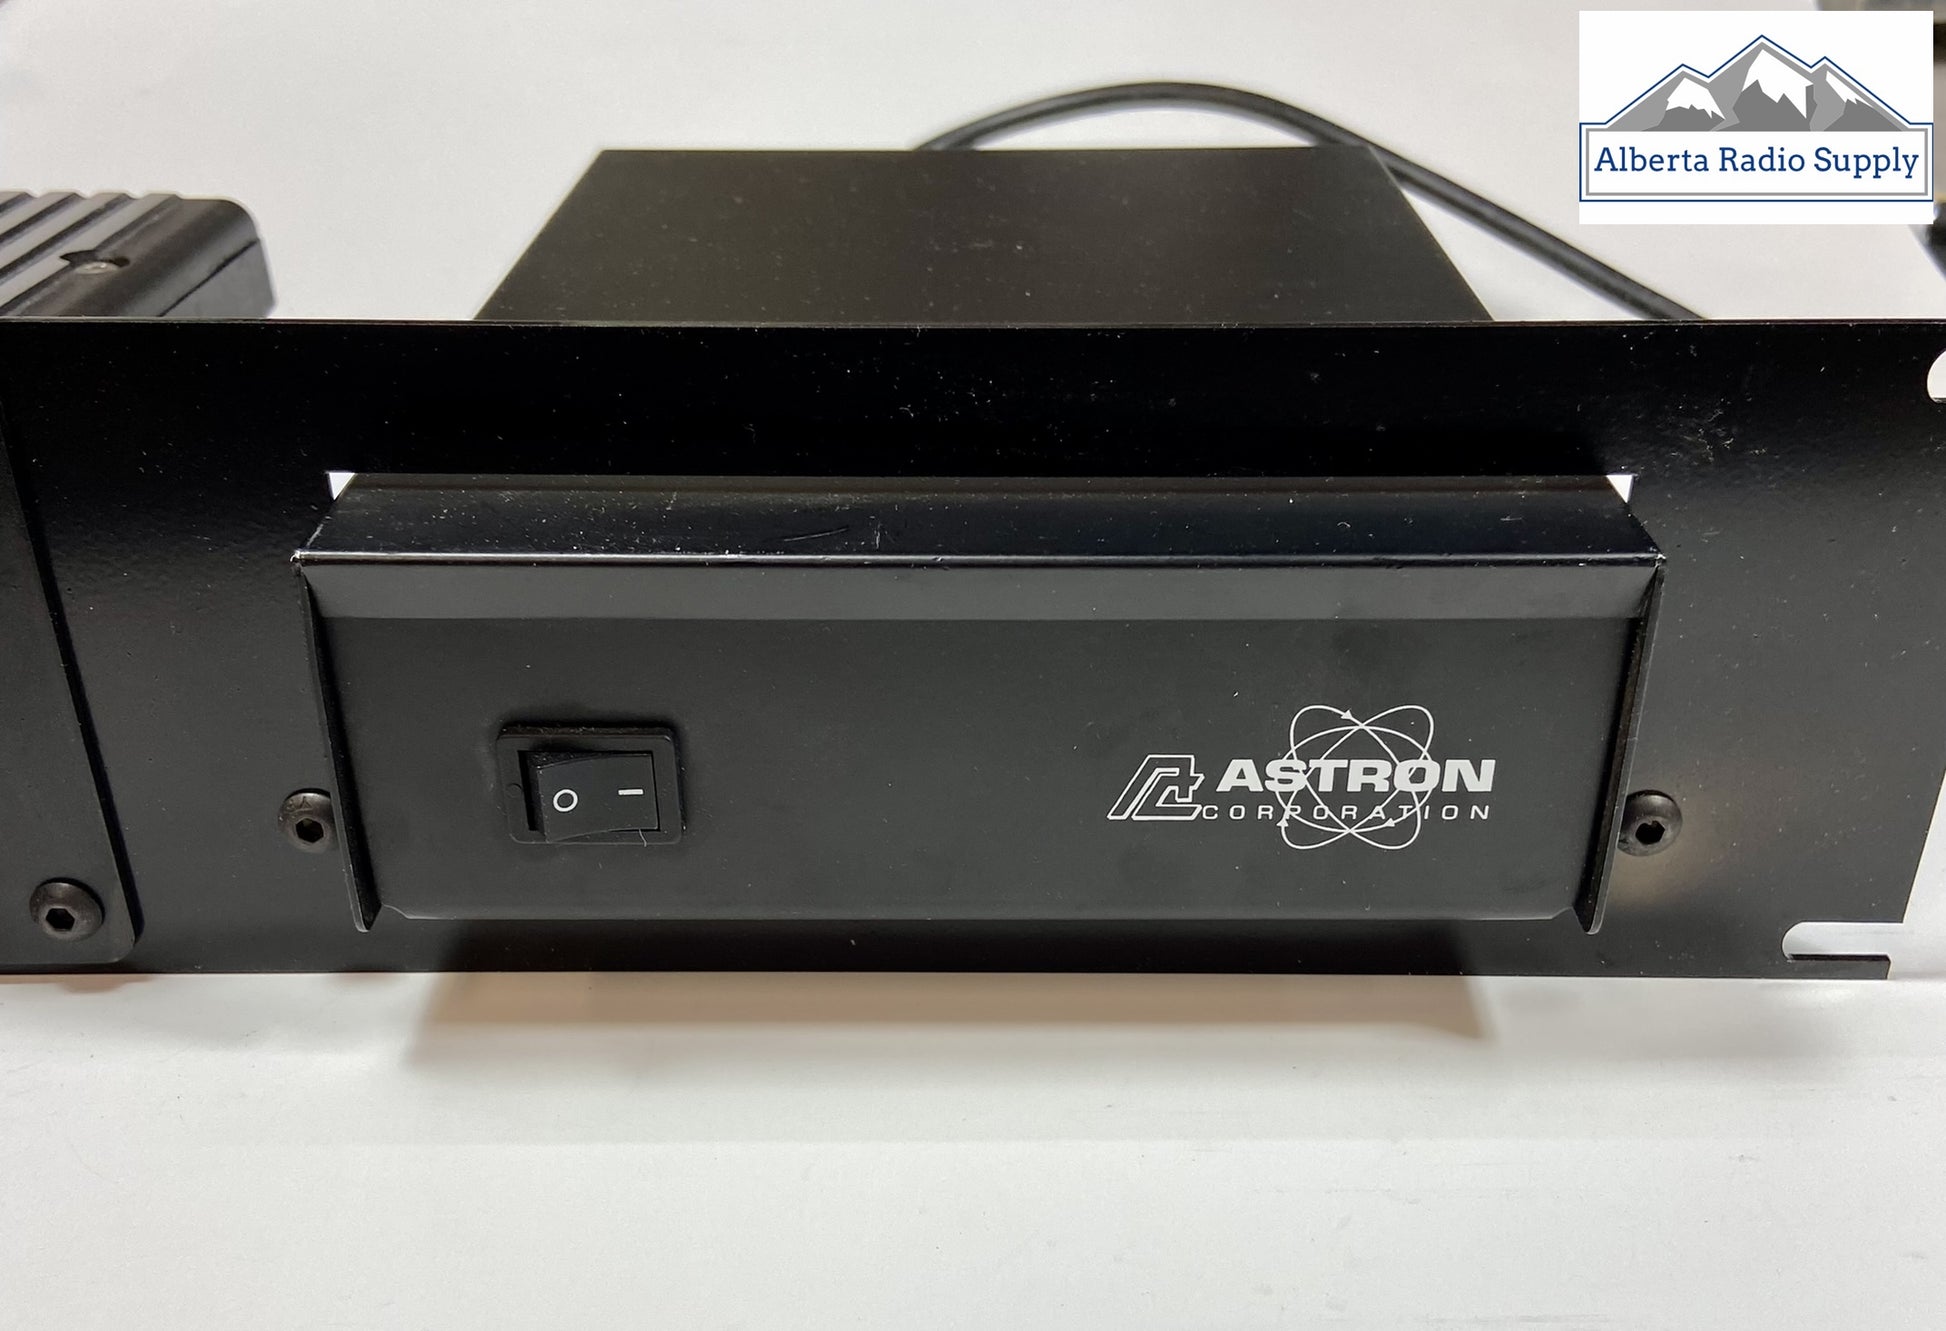 Astron power supply rack mount ss-18